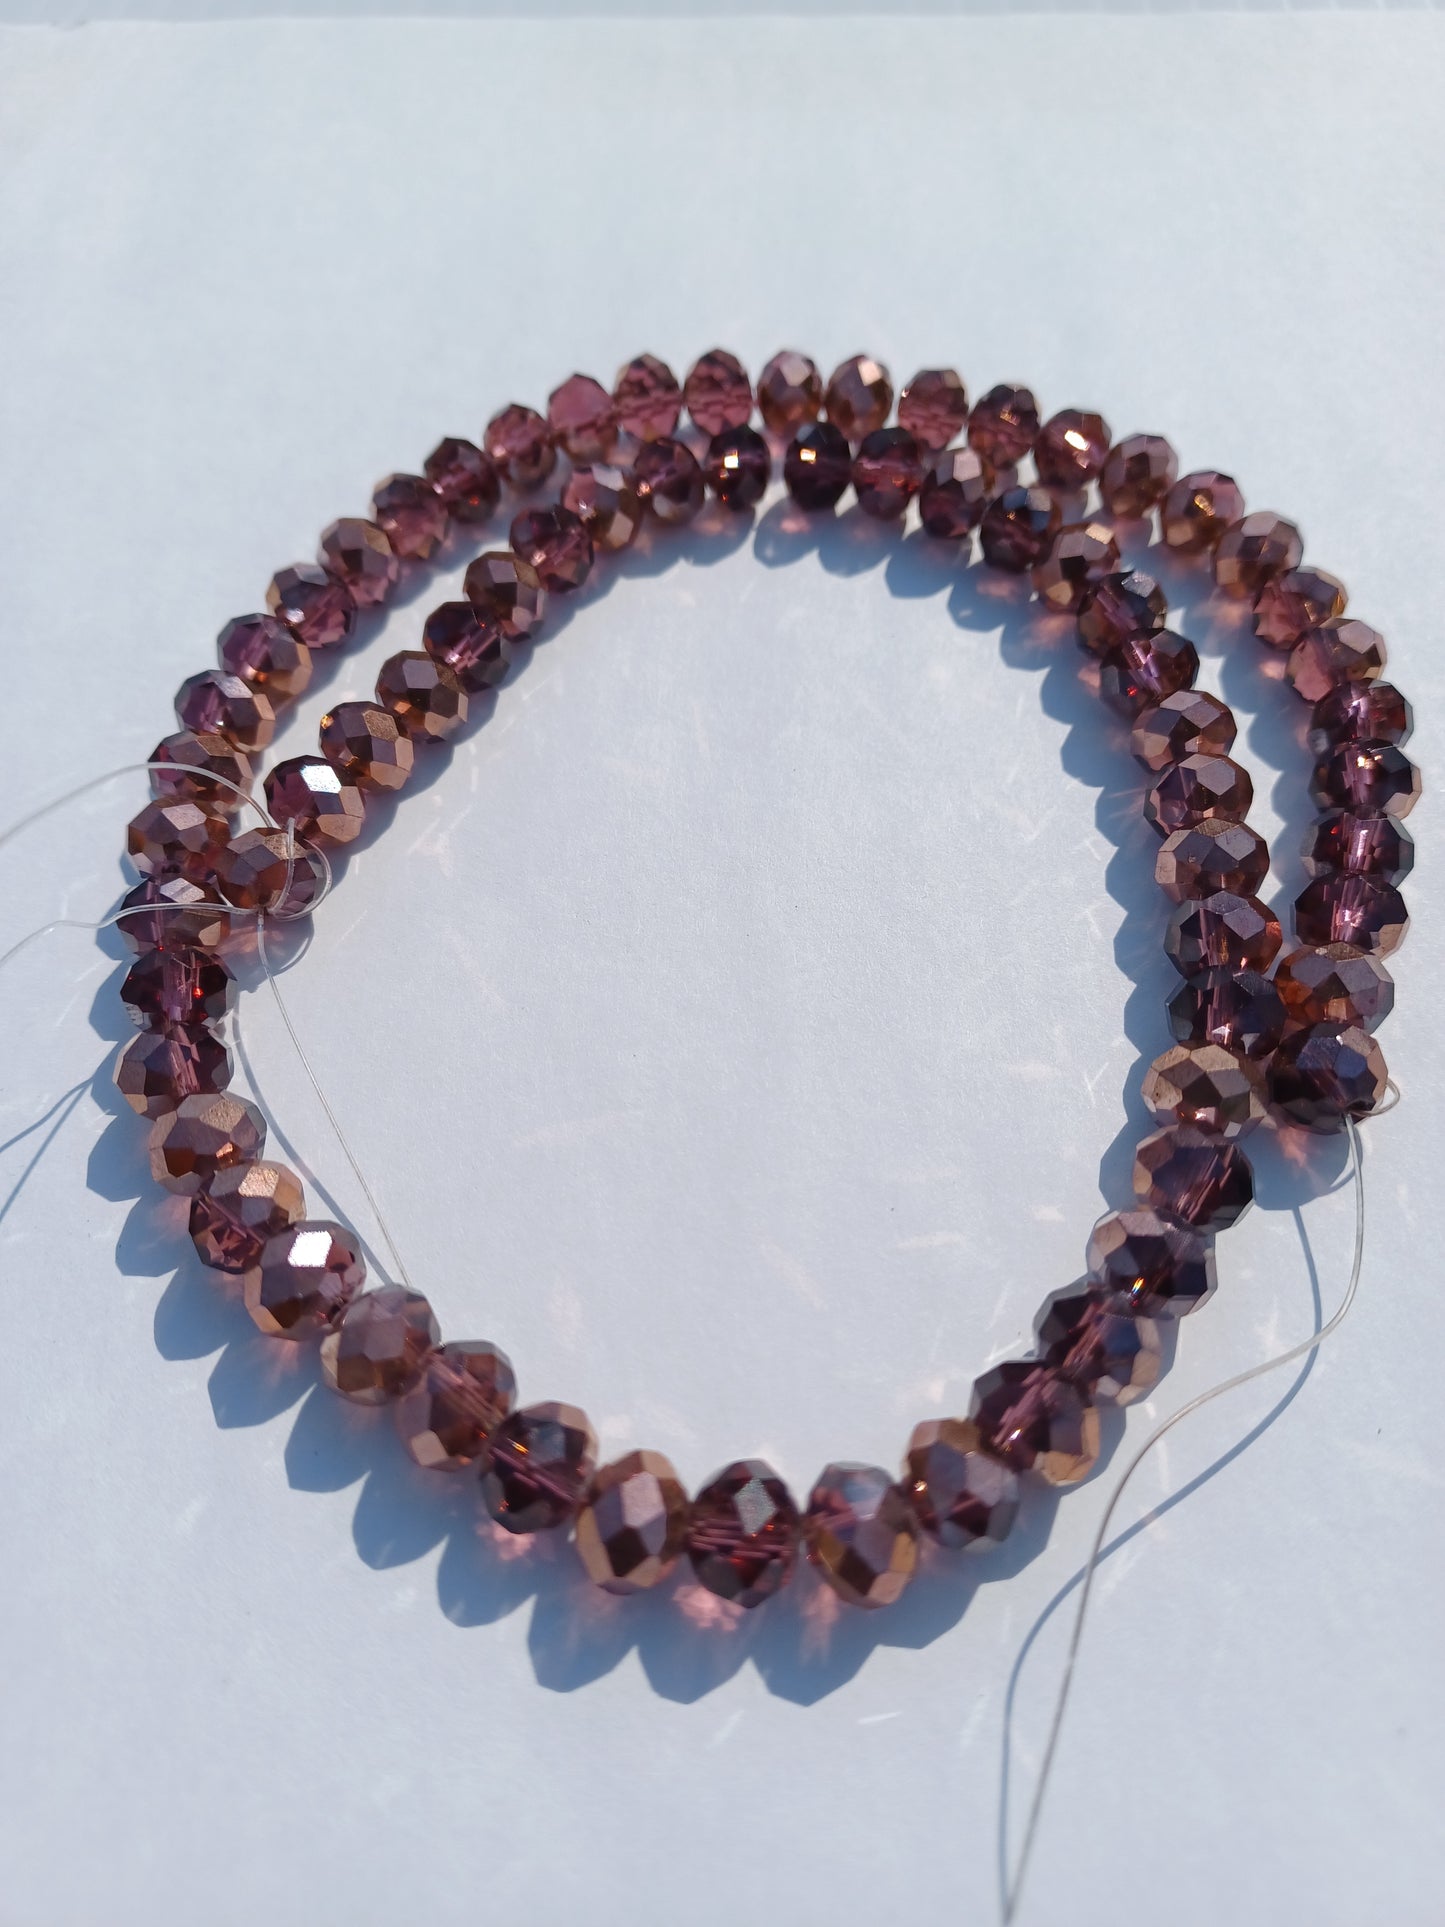 Chinese Crystal Beads Rondelle Shape, 8mm X 6mm Amethyst with Rose Gold Plating